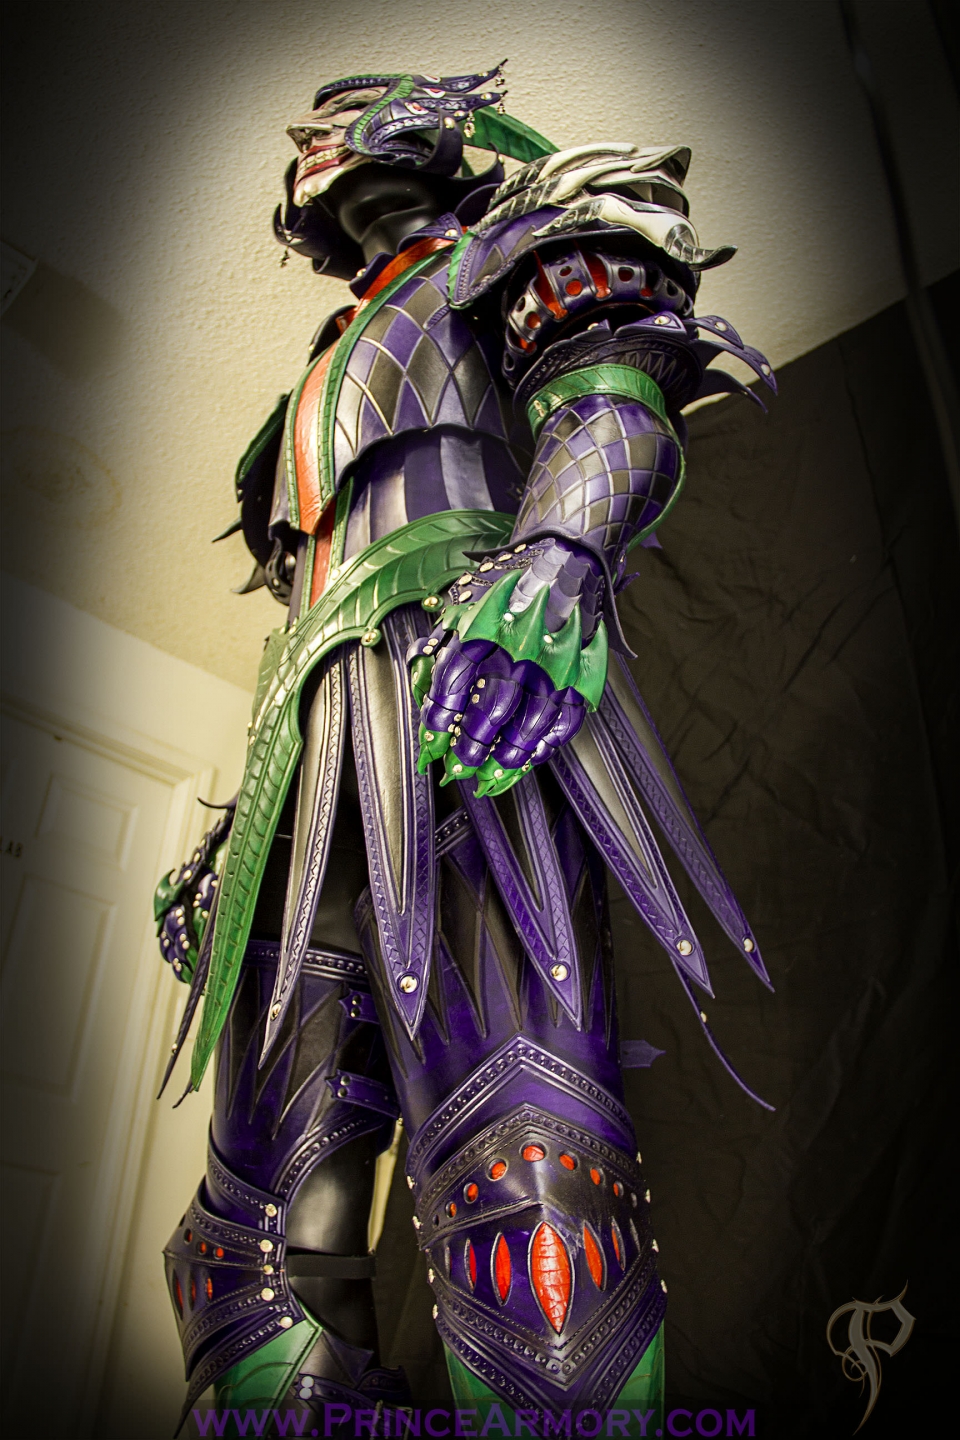 You Could Be the Medieval Clown Prince of Crime in this Insane Joker Armor  — GeekTyrant